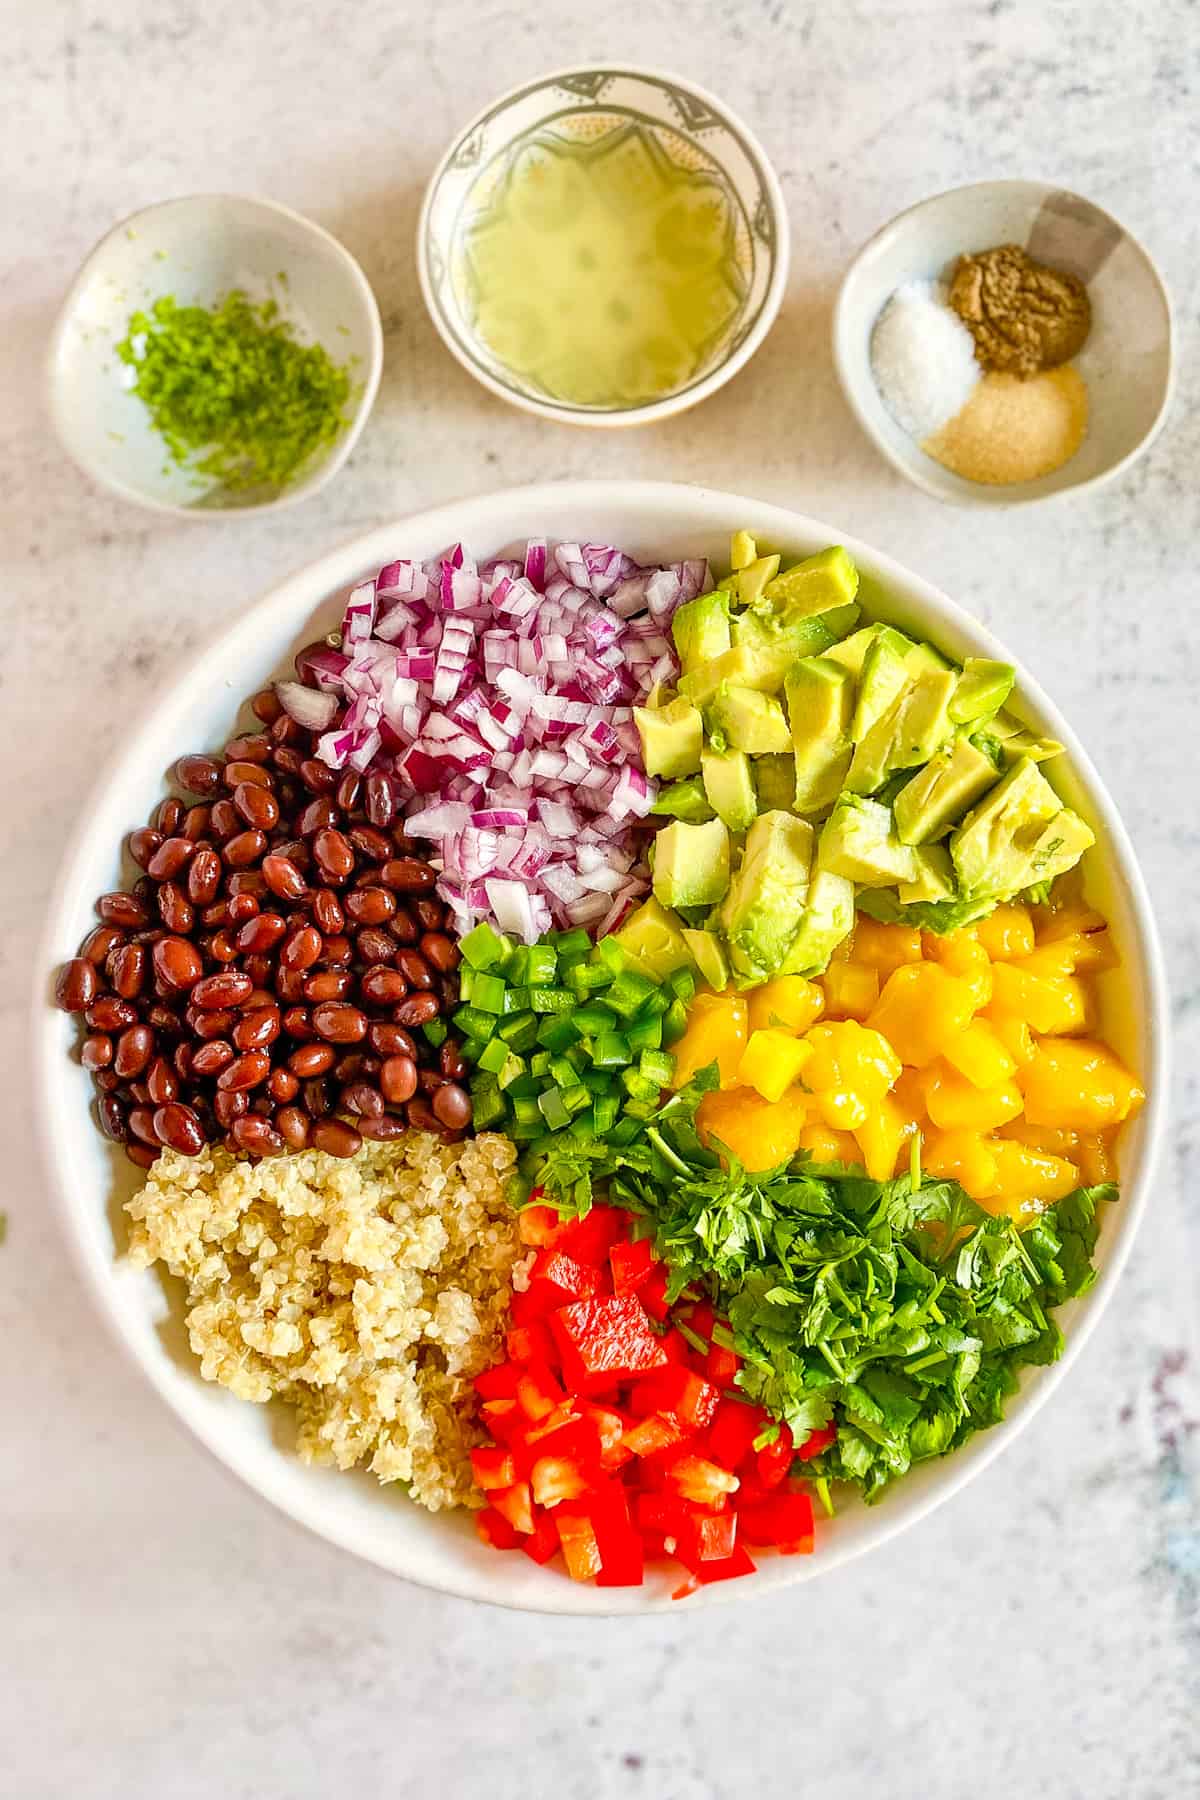 Vegan quinoa salad with avocado, onion, beans, cilantro, jalapeno, and red bell pepper.